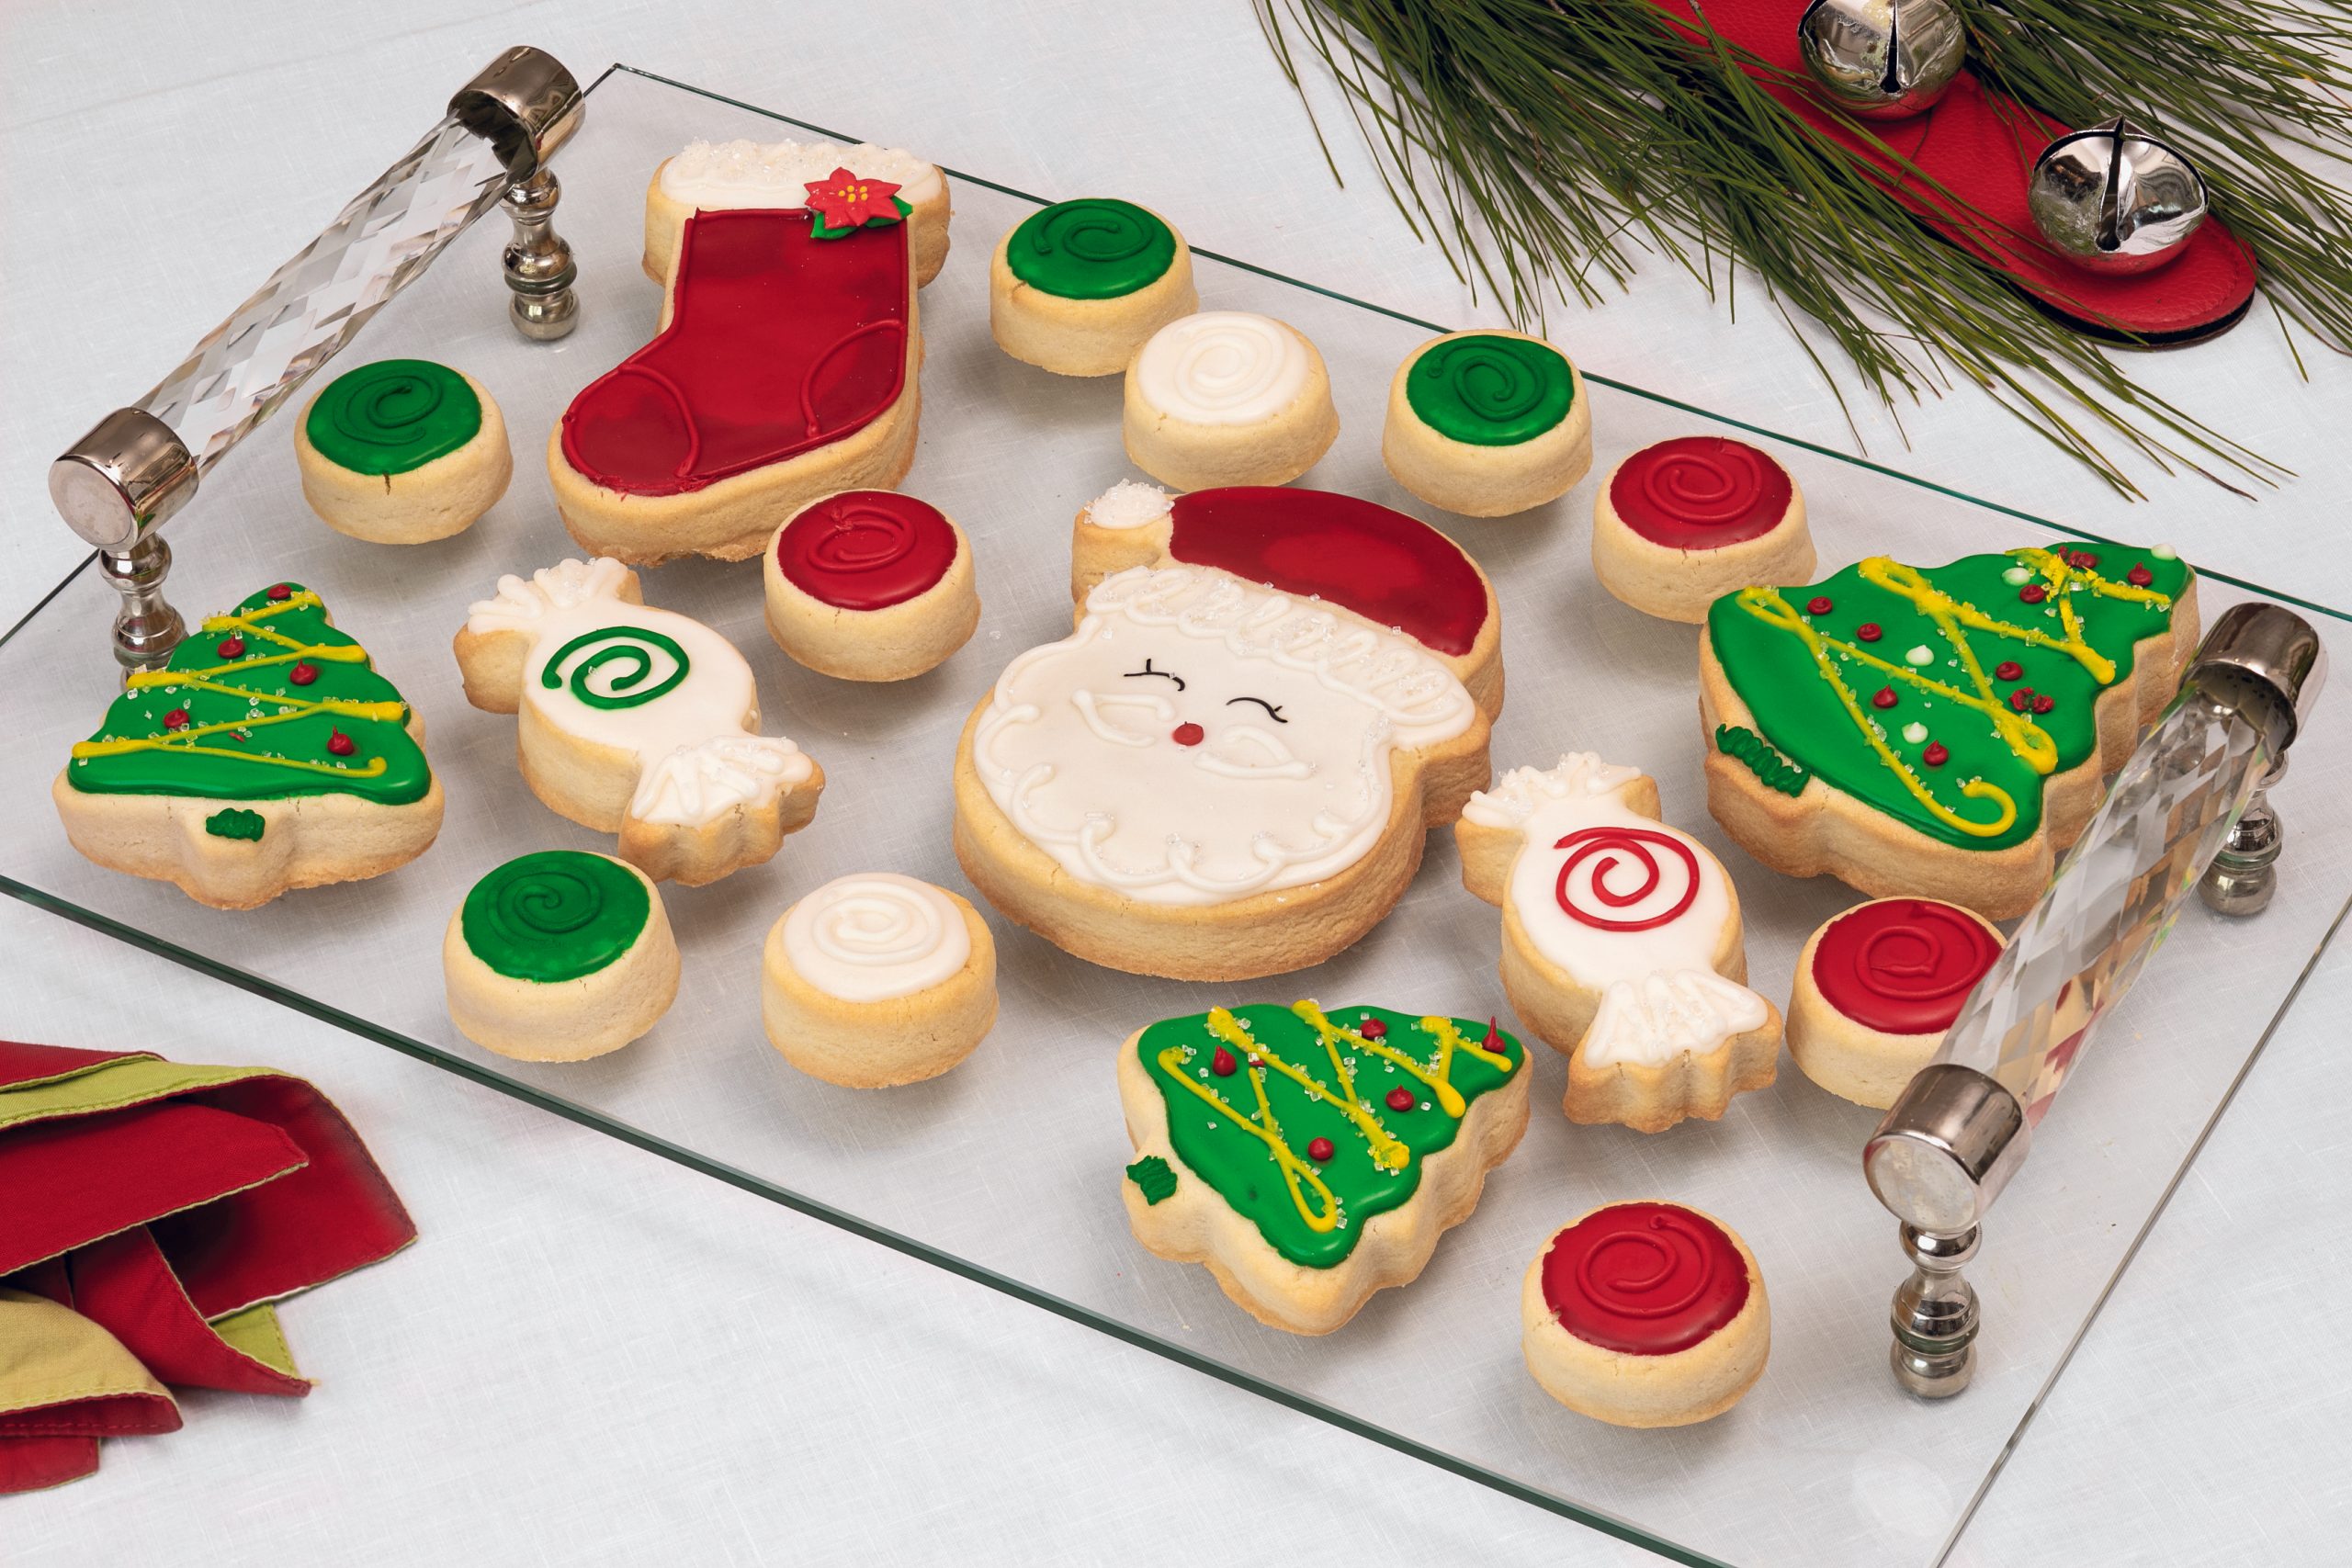 Blue Flour Bakery’s brilliantly decorated Christmas sugar cookies will not last long at any holiday party, however they are served!